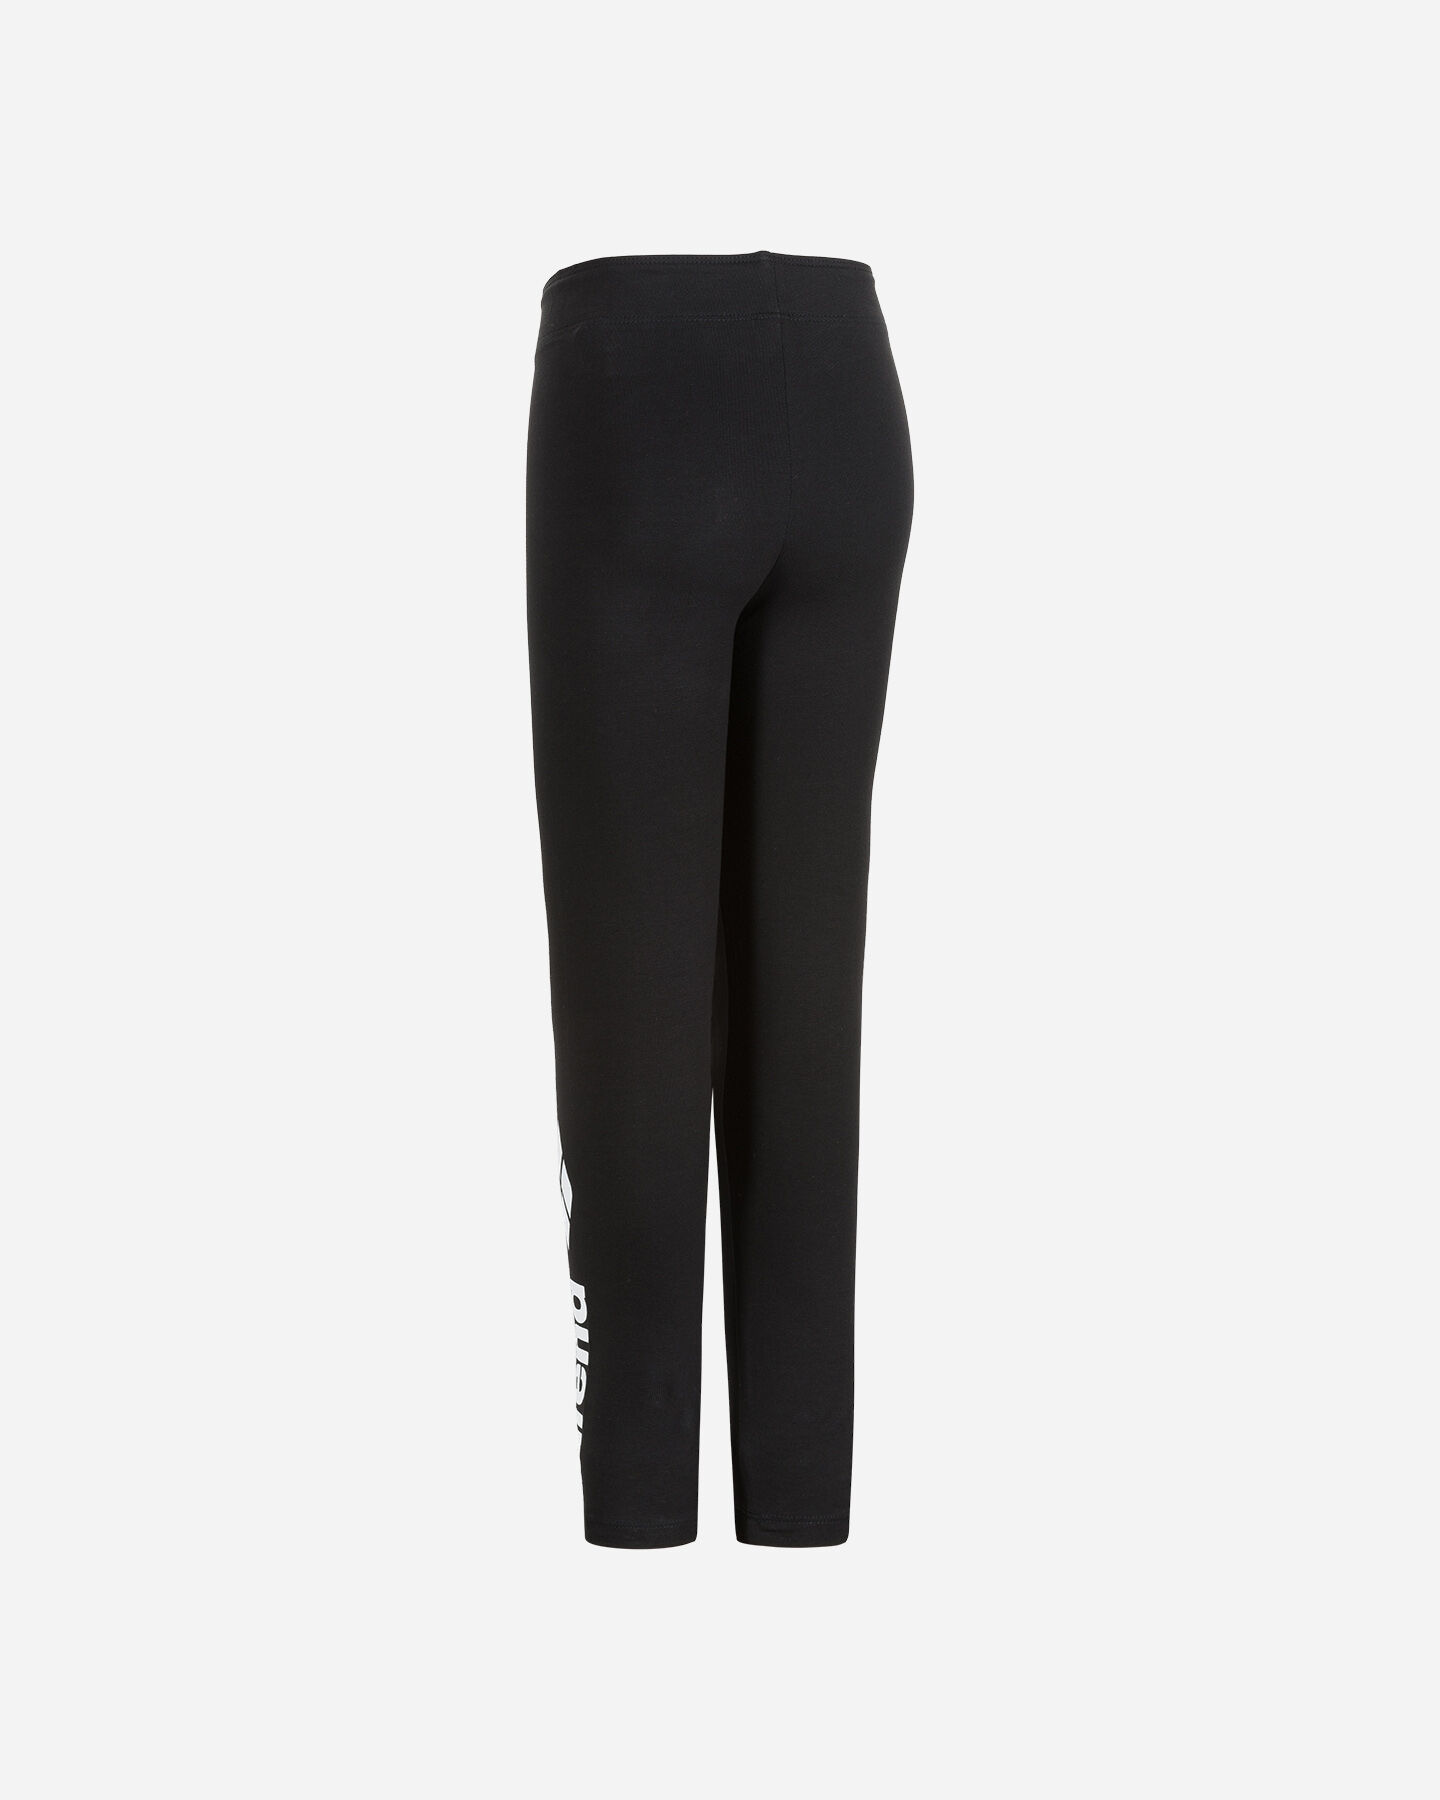  Leggings ARENA BASIC JR S4081659|050|4A scatto 1